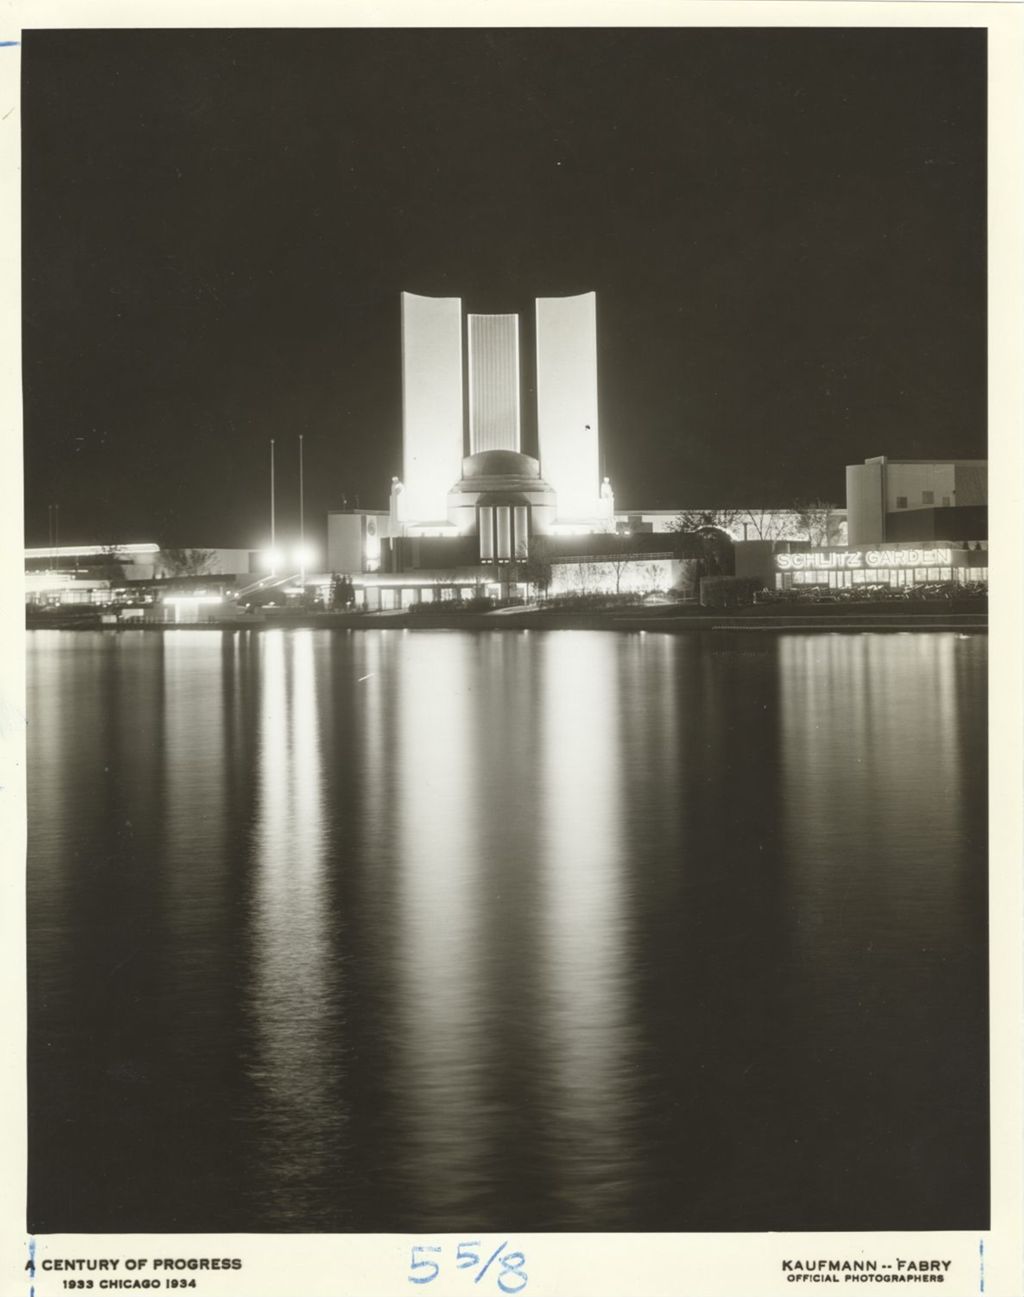 Miniature of Night time view of the Federal Building at the Century of Progress International Exposition, 1933-1934.